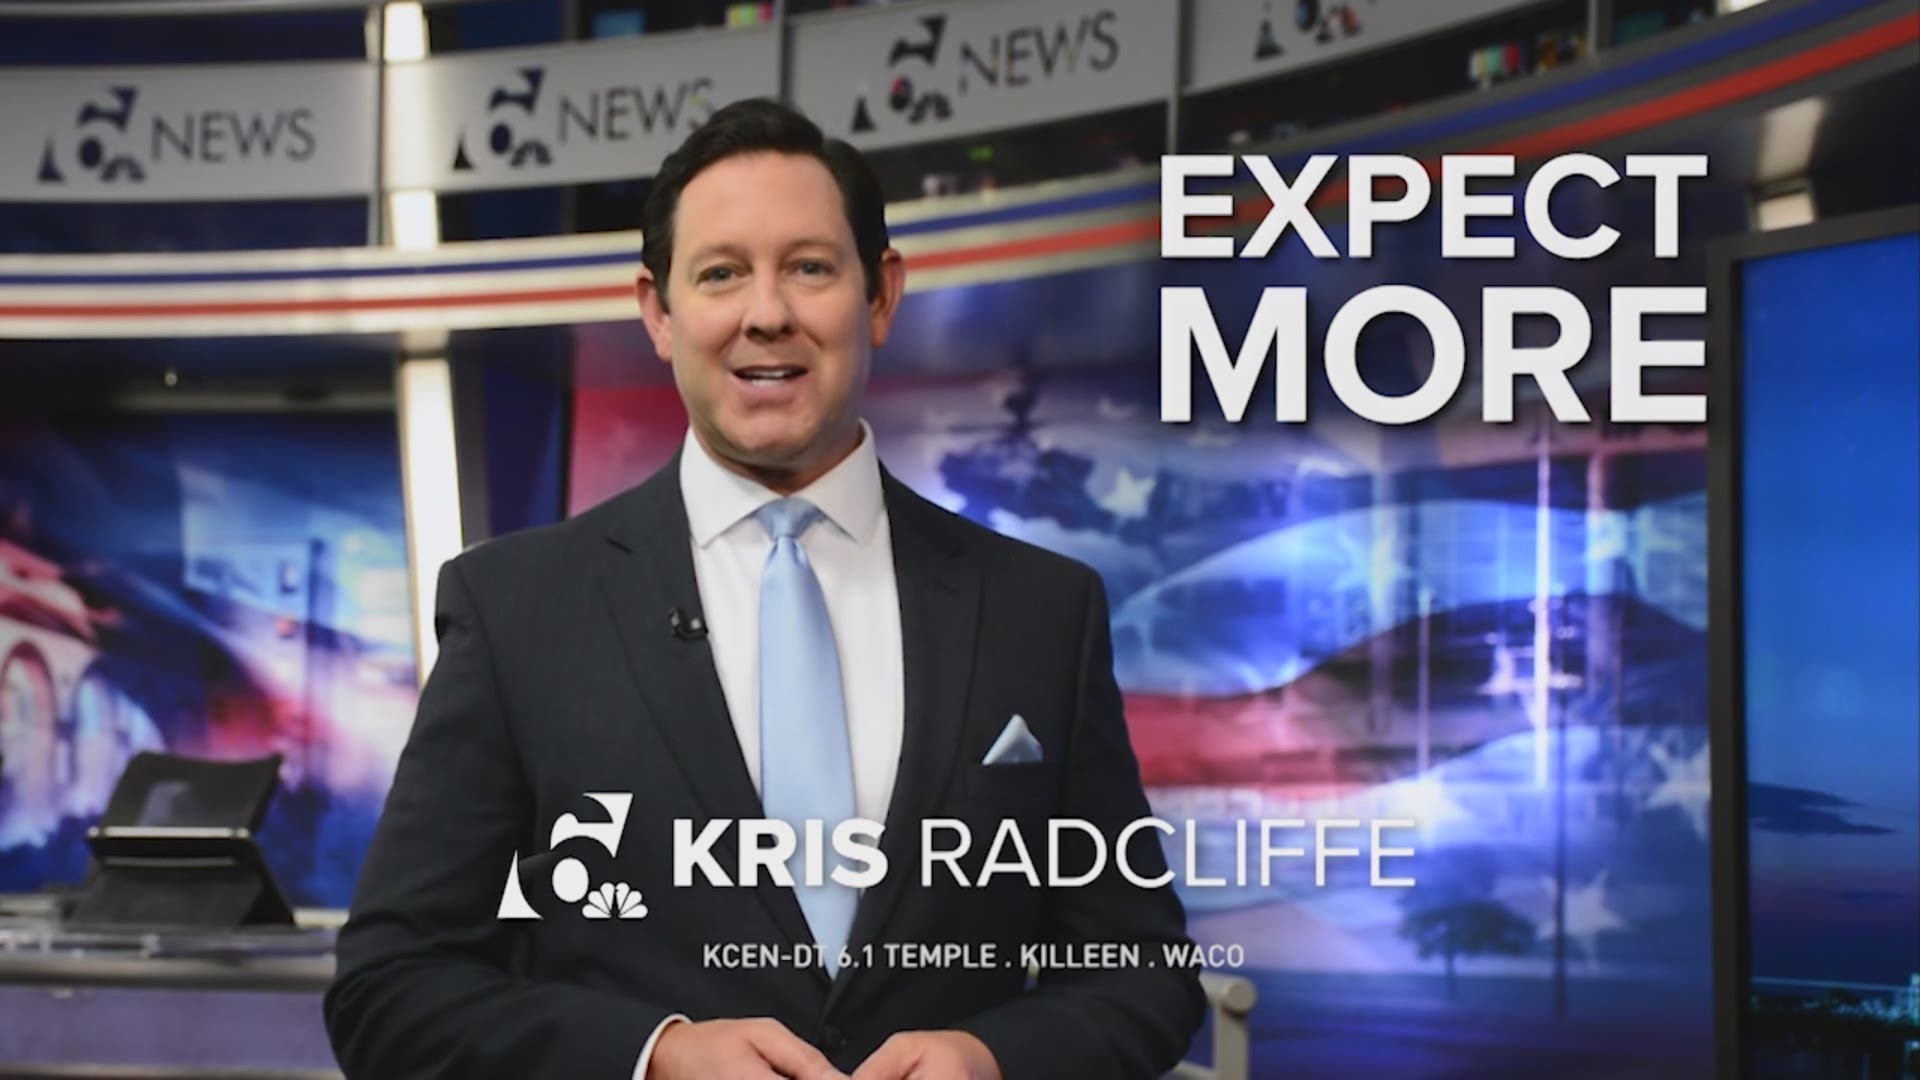 Kris Radcliffe co-anchors 6 News at 5, 6 and 10 p.m.